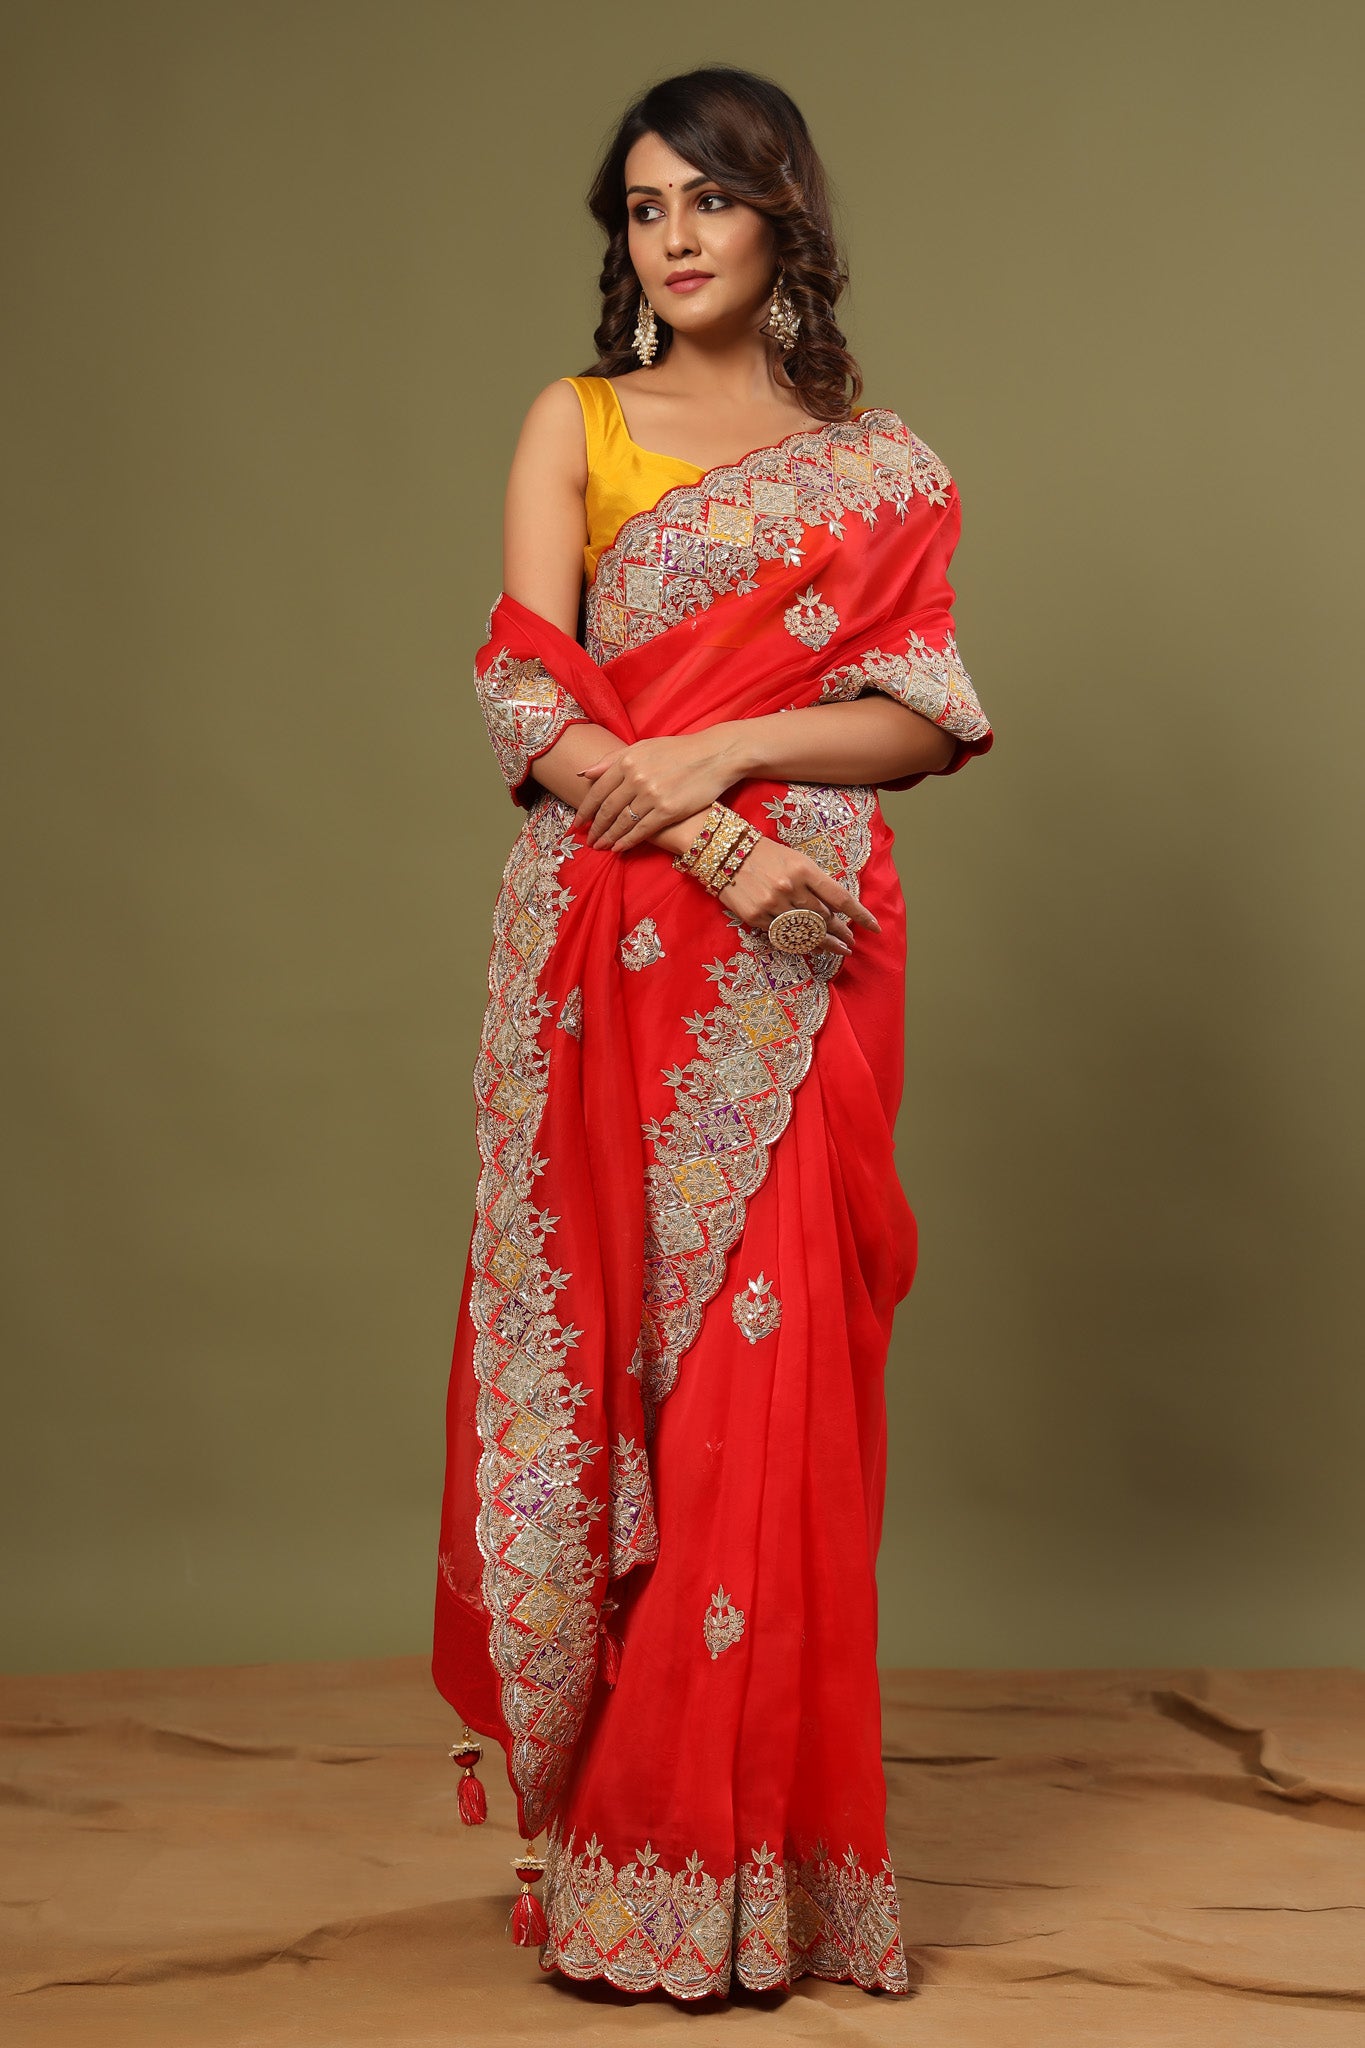 Buy stunning red hand embroidered organza sari online in USA. Make a fashion statement at weddings with stunning designer sarees, embroidered sarees with blouse, wedding sarees, handloom sarees from Pure Elegance Indian fashion store in USA.-front